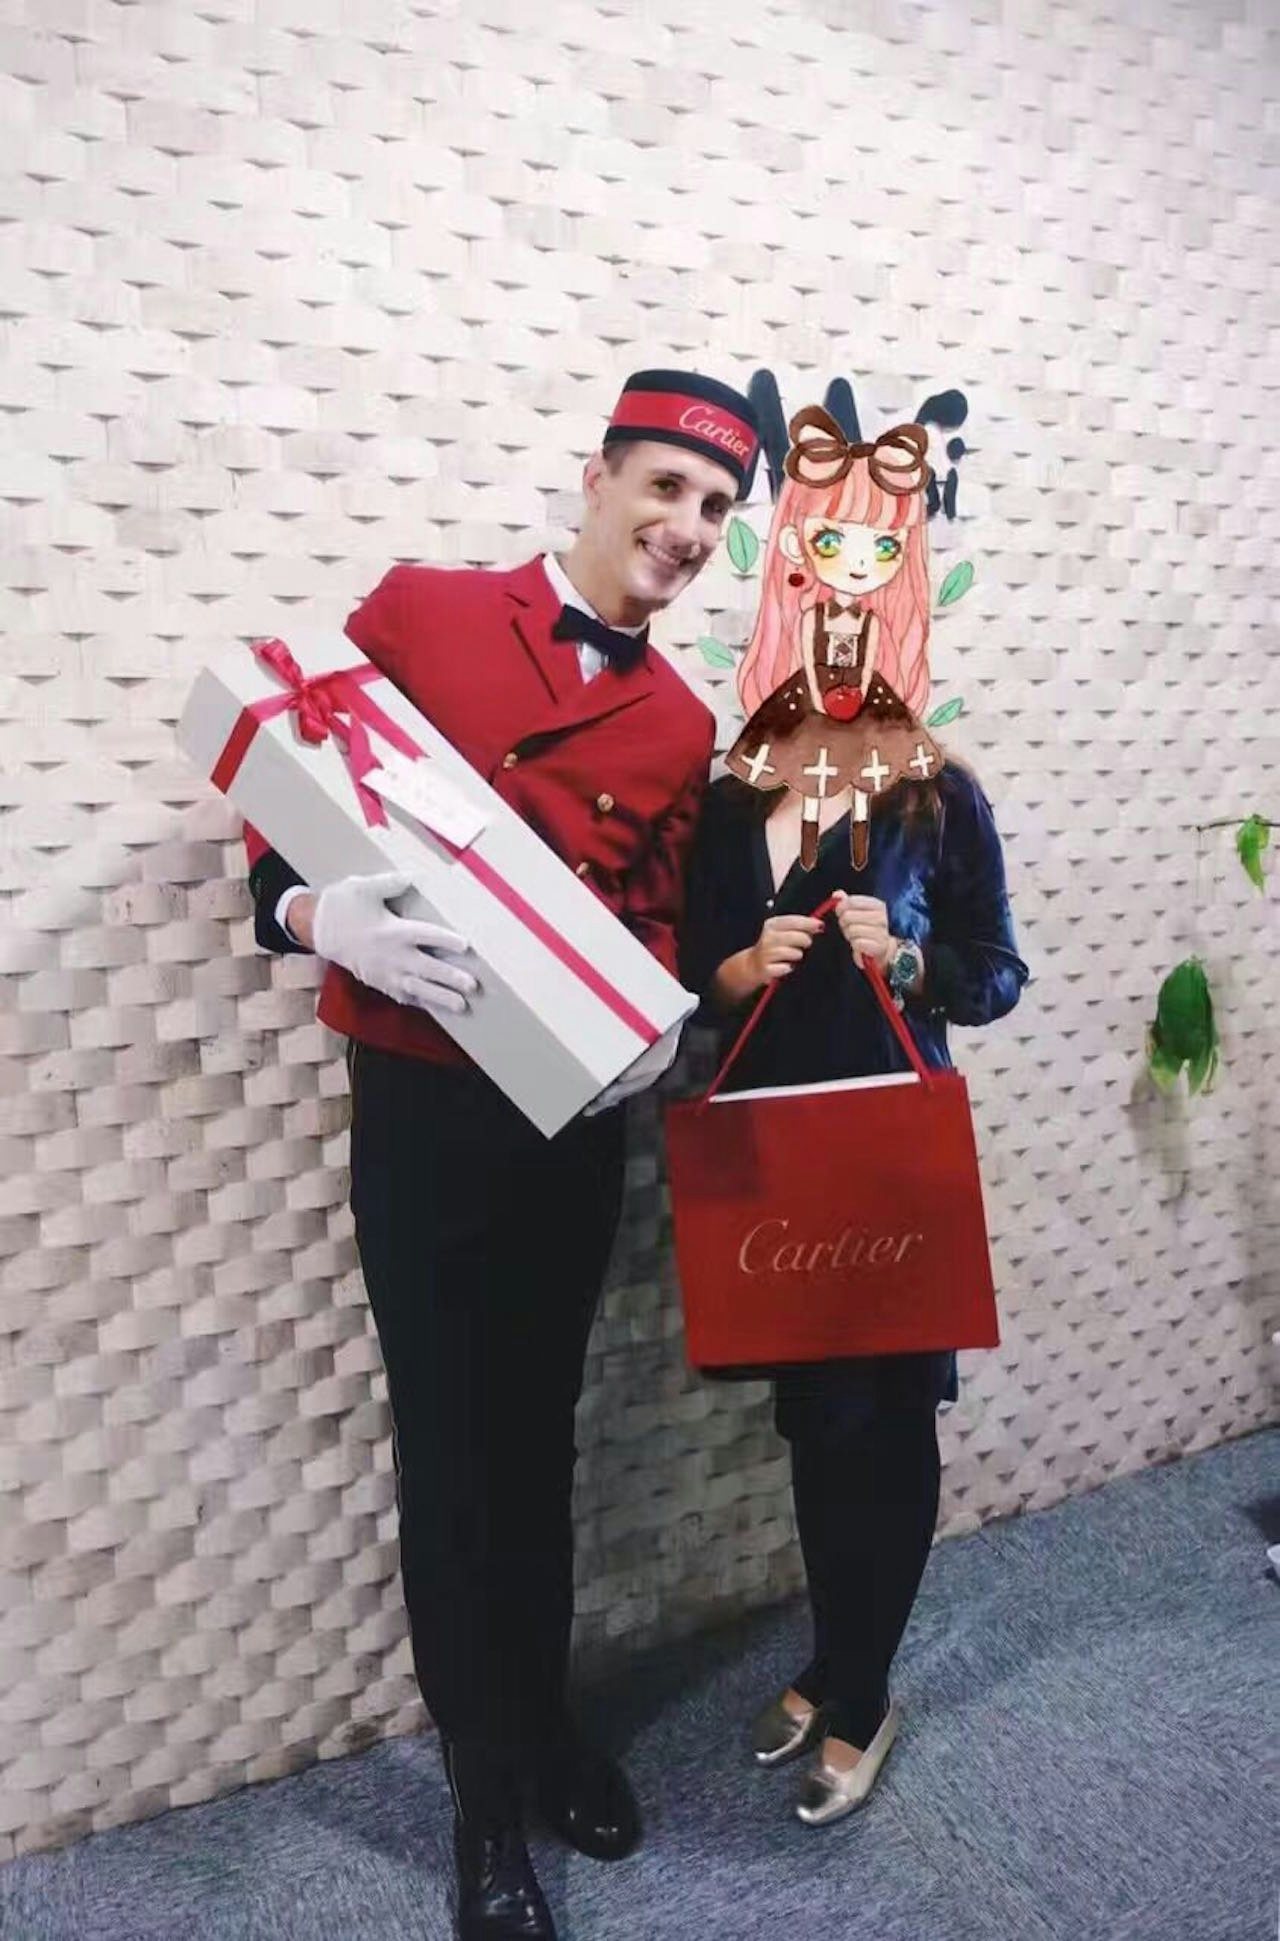 Cartier offers gift delivery by bellboy for Valentine's Day. (Courtesy Photo)